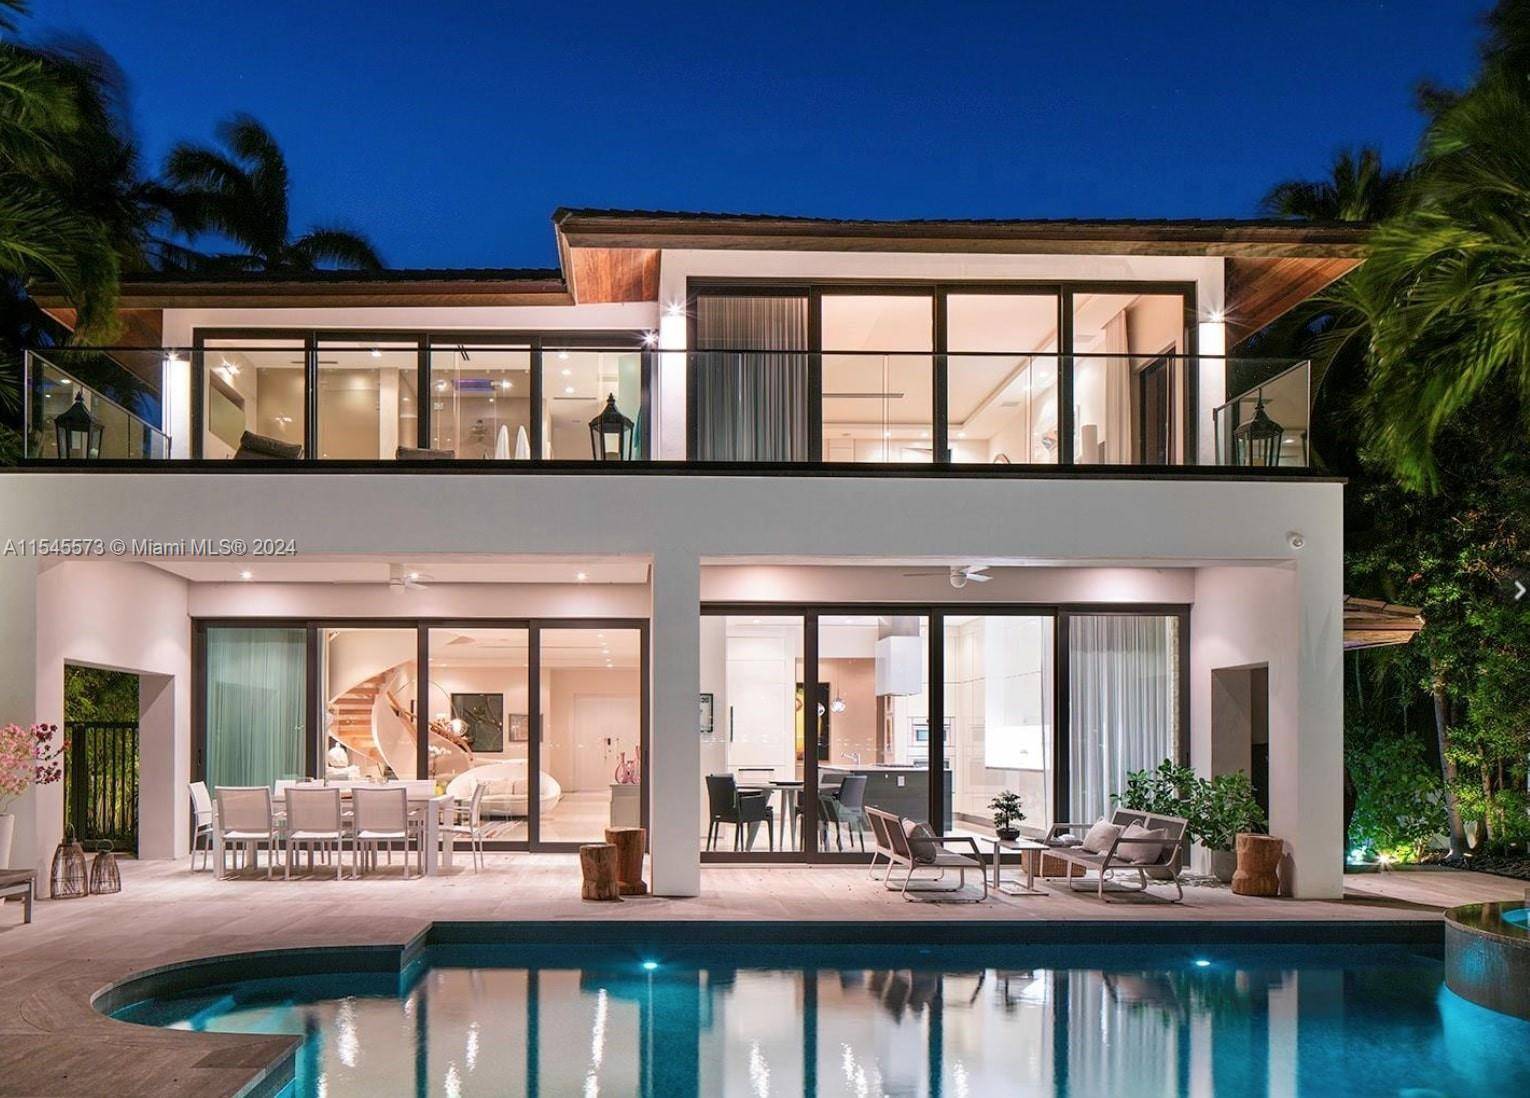 Lush tropical landscaping envelops this exquisite contemporary waterfront residence with mesmerizing vistas of Miami Beach from its expansive floor to ceiling telescopic sliding glass doors.